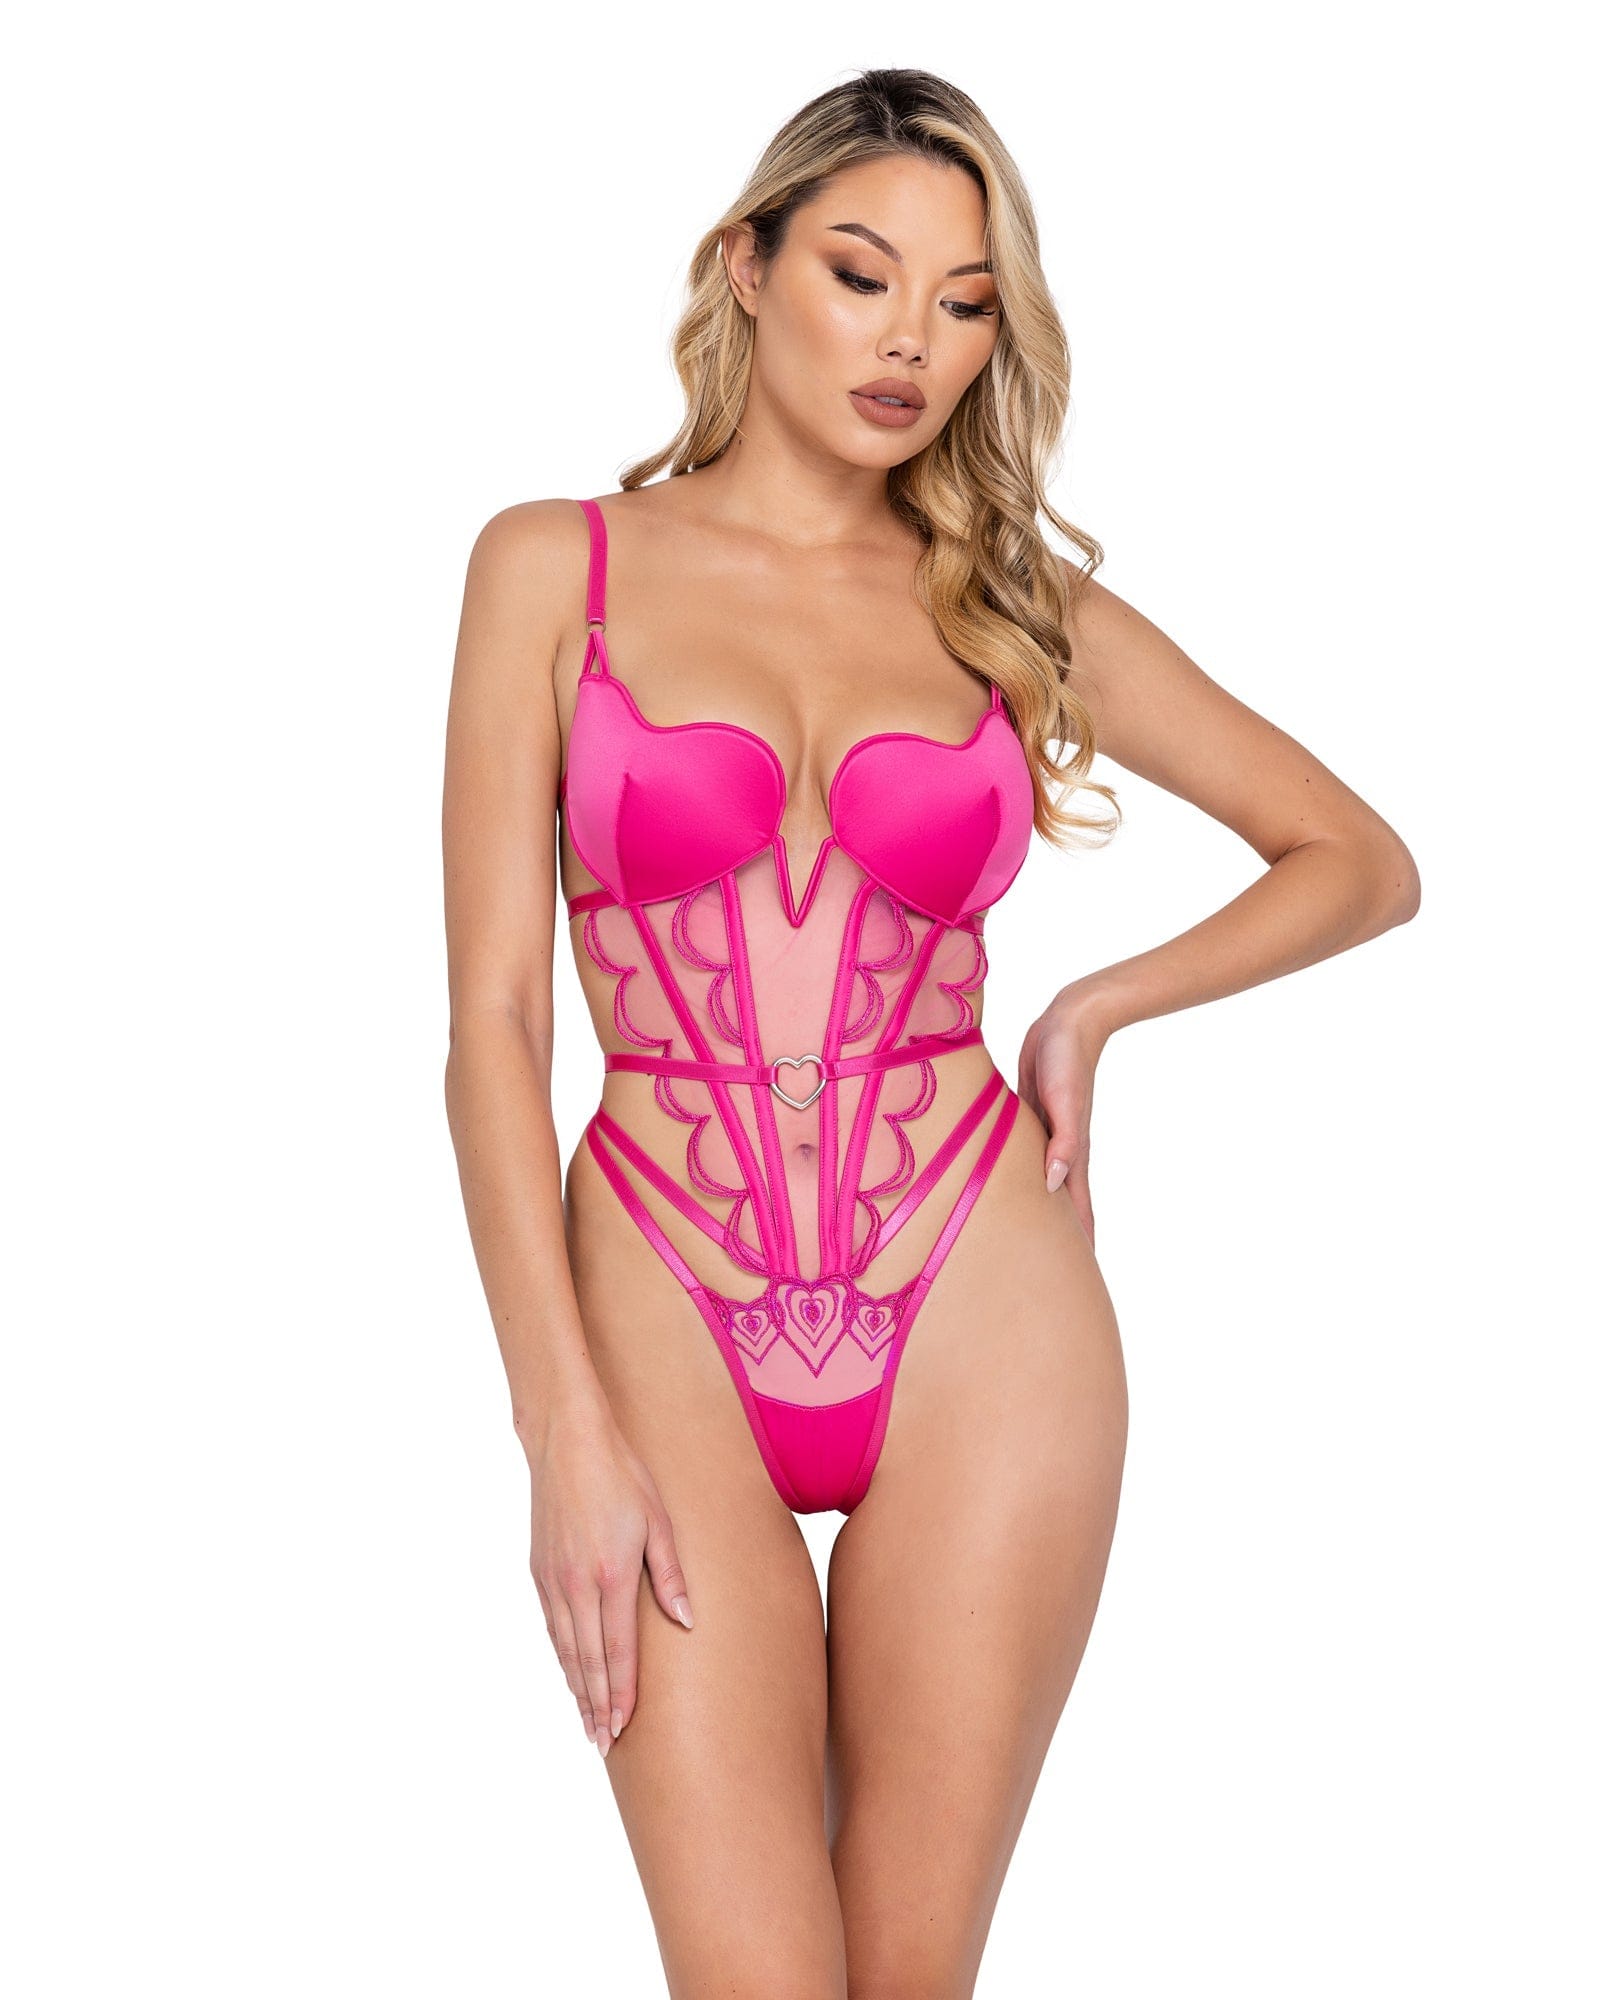 Roma Pink / Extra Small Bubblegum Metallic Lace Heart Cup Teddy Lingerie LI627-Pink-XS 2023 Sexy 2 Pc Bubblegum Satin Heart Cup Short Set Lingerie Apparel & Accessories > Clothing > Underwear & Socks > Lingerie